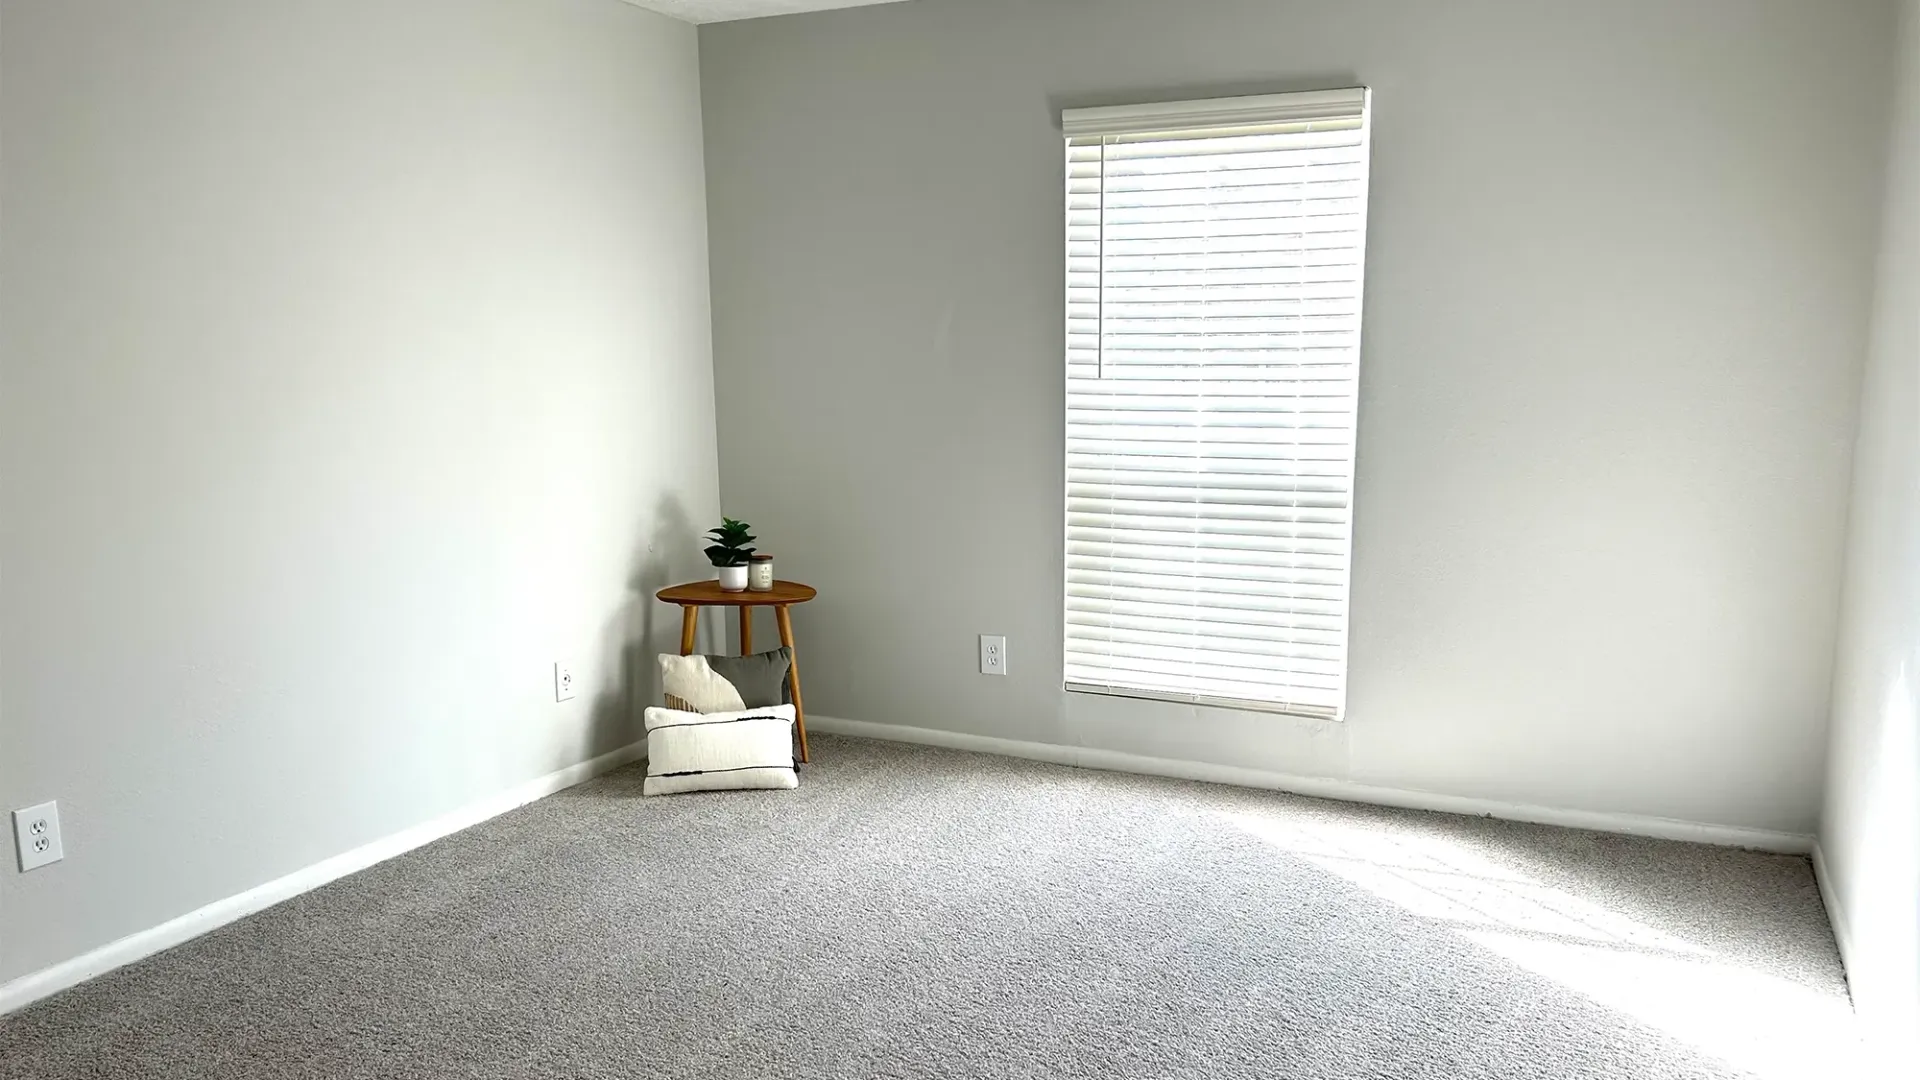 A large bedroom with plush carpeting and a window